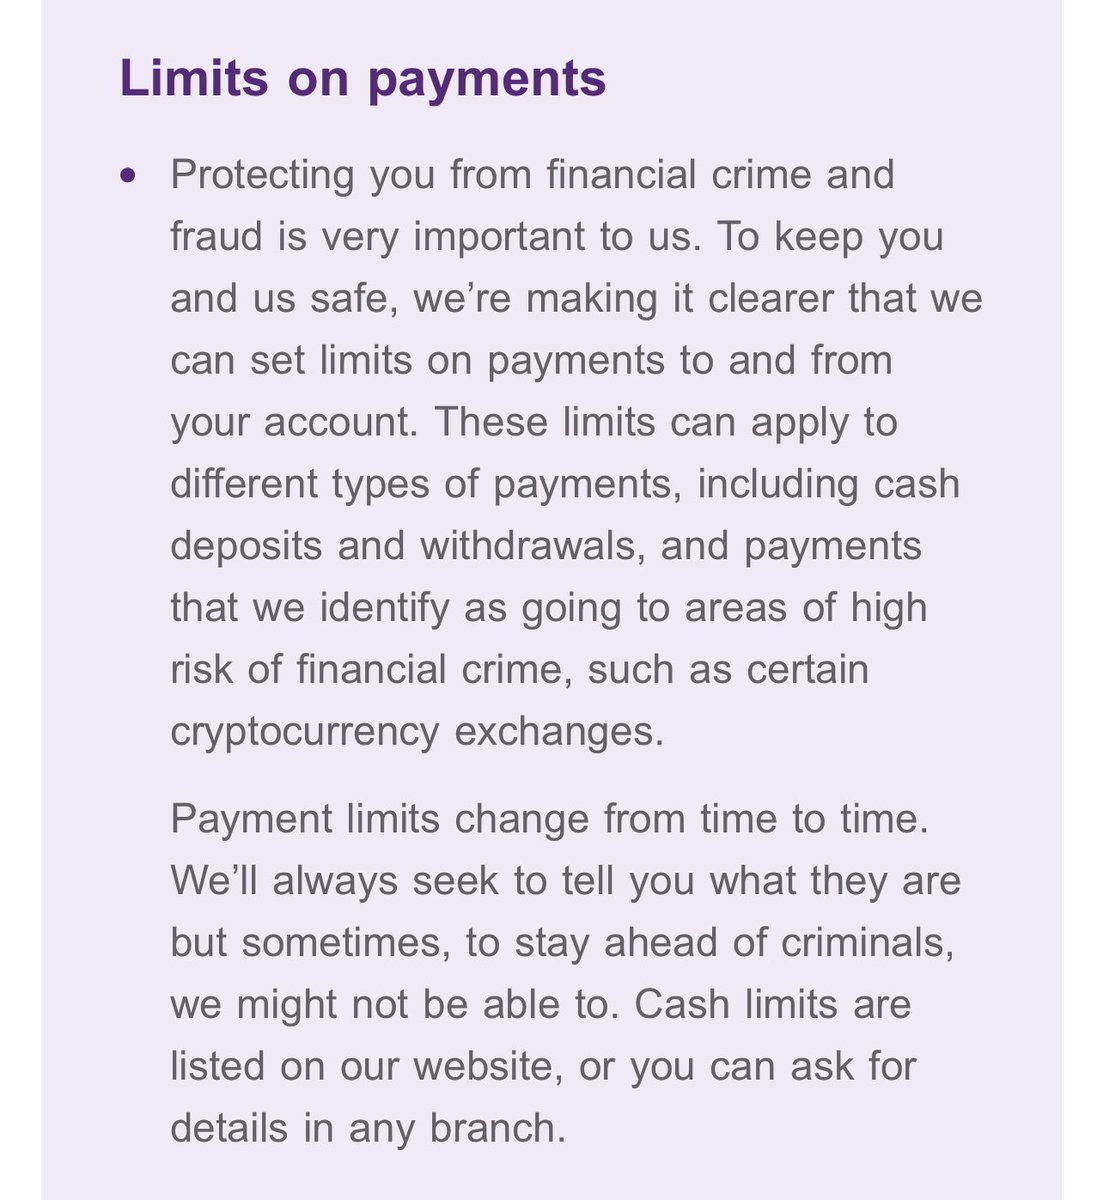 NatWest have just emailed: ‘To keep you & us safe, we’re making it clearer that we can set limits on payments to and from your account. .. We’ll always seek to tell you..but sometimes..we might not be able to.’ Restricting access to my own money does not make me feel safe😡